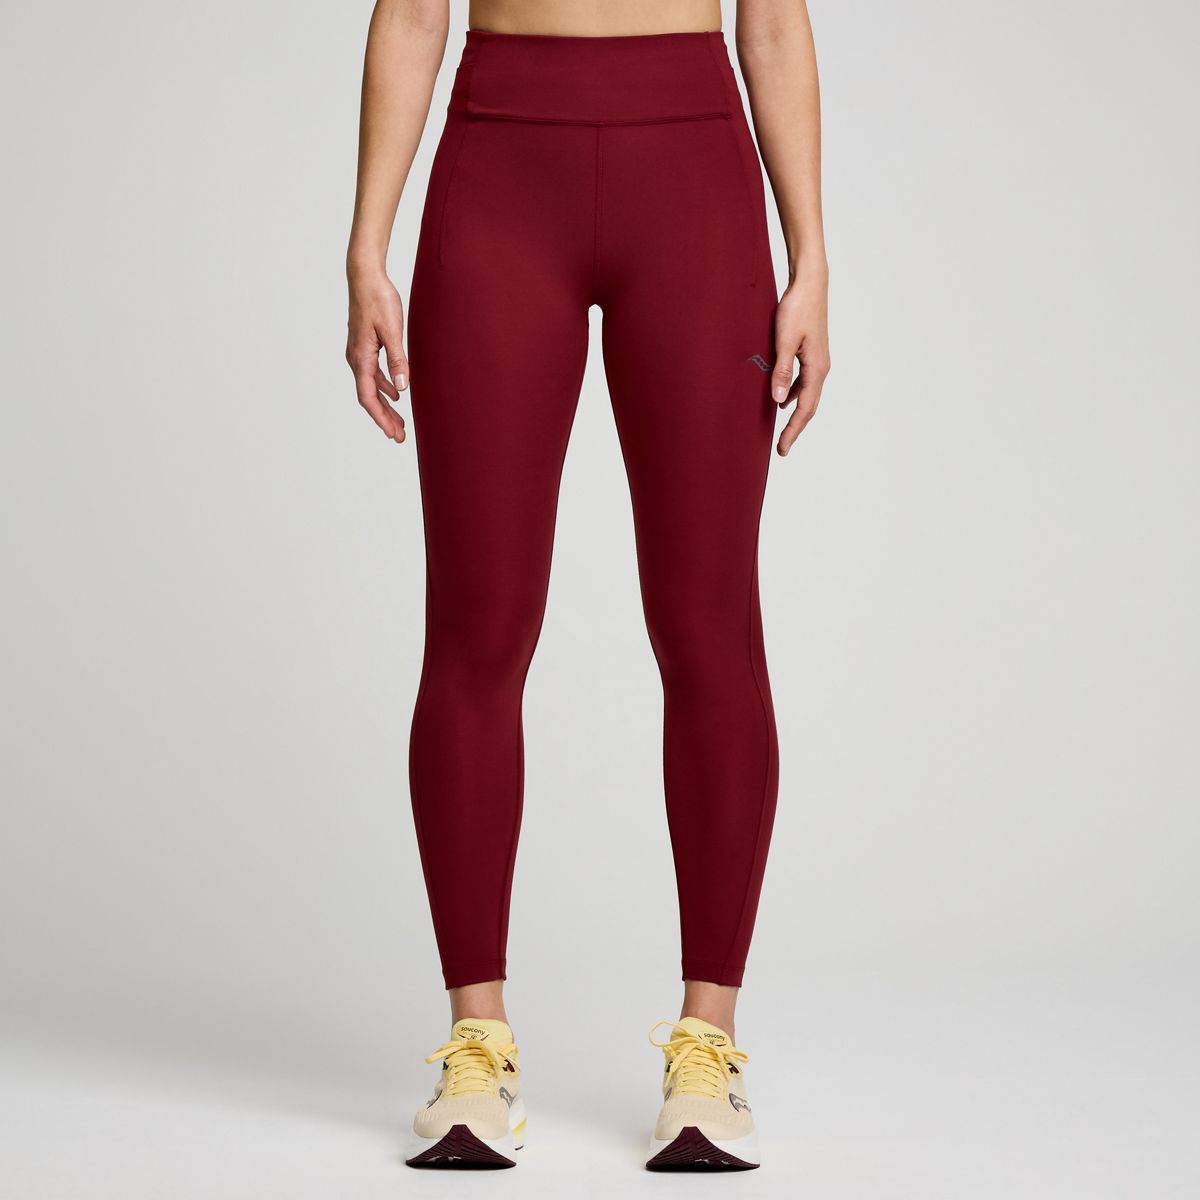 Women's Fortify Tight